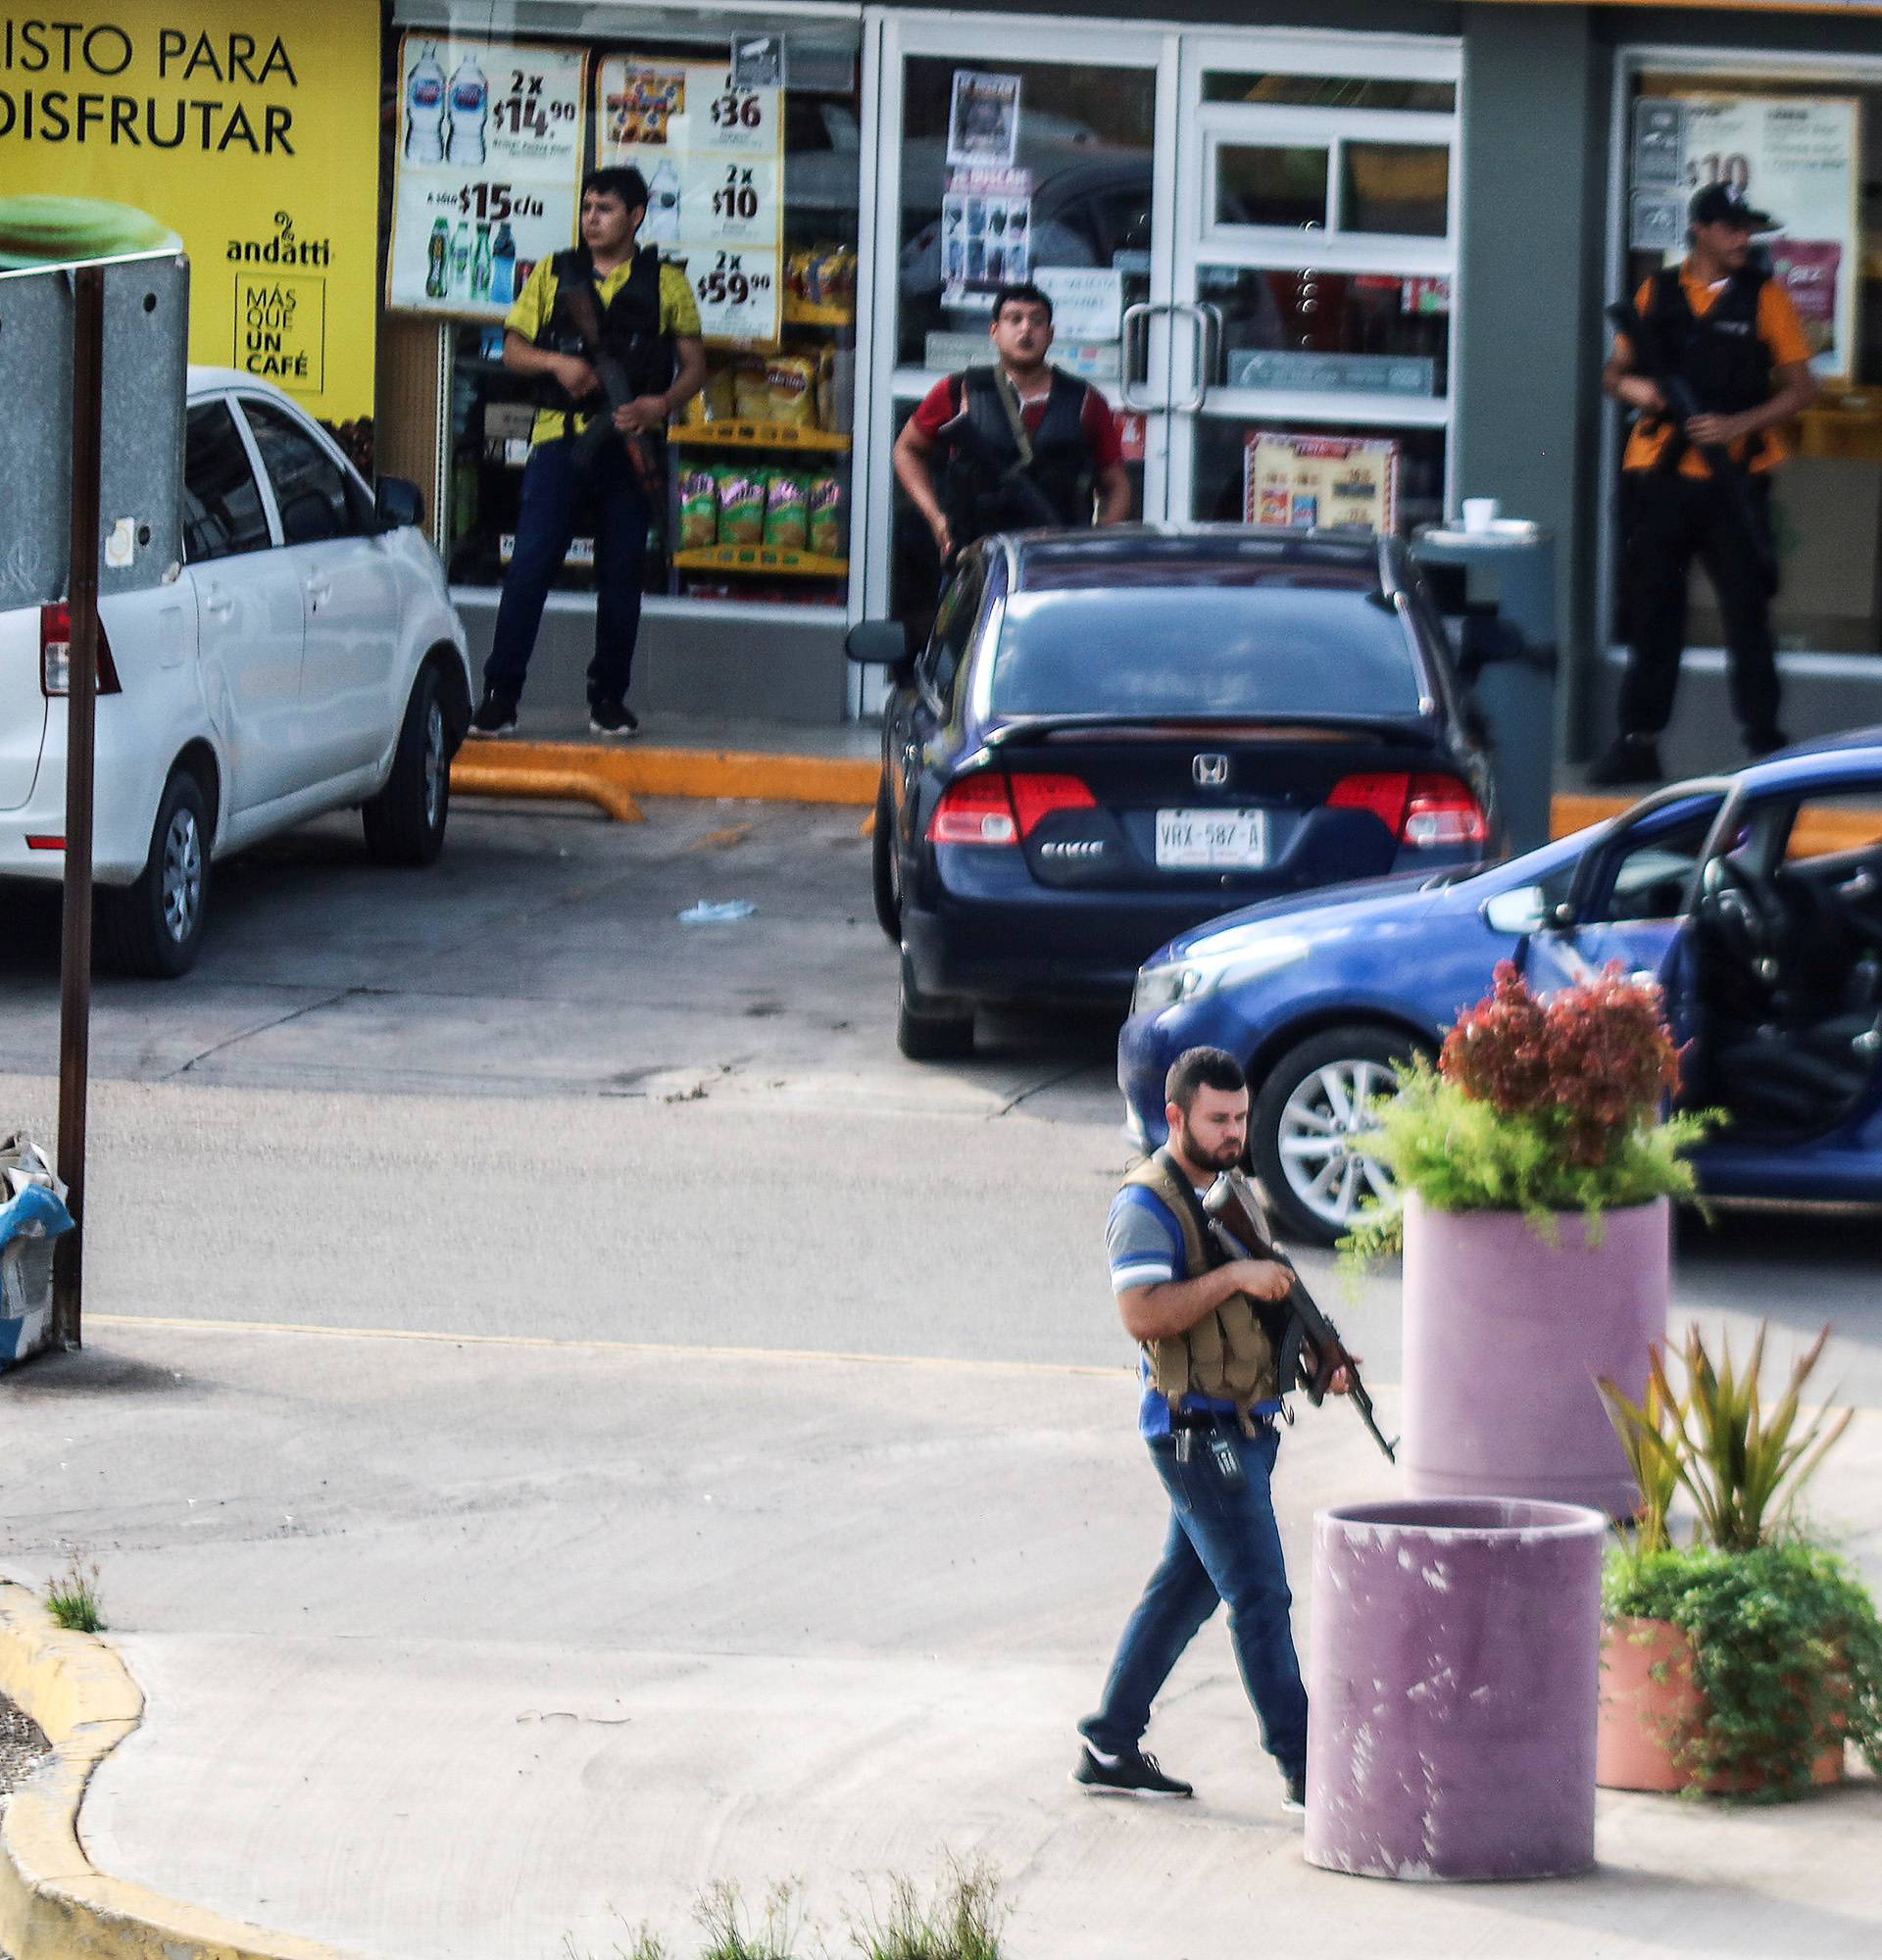 Cartel gunmen are seen outside during clashes with federal forces following the detention of Ovidio Guzman, son of drug kingpin Joaquin "El Chapo" Guzman, in Culiacan